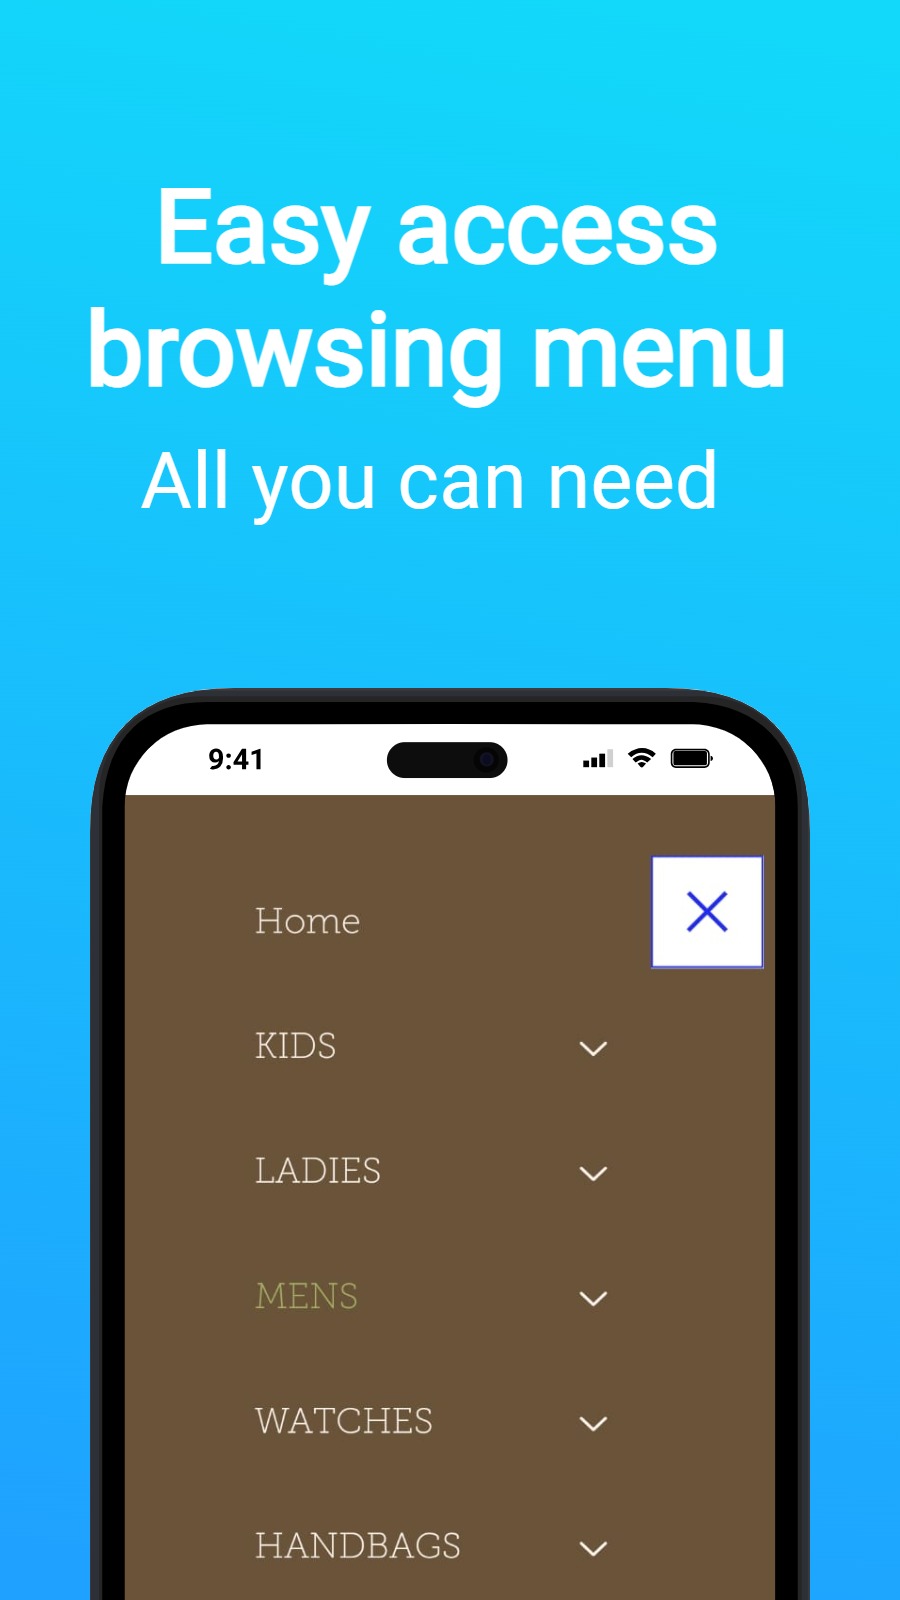 Easy access browsing menu - All you can need 